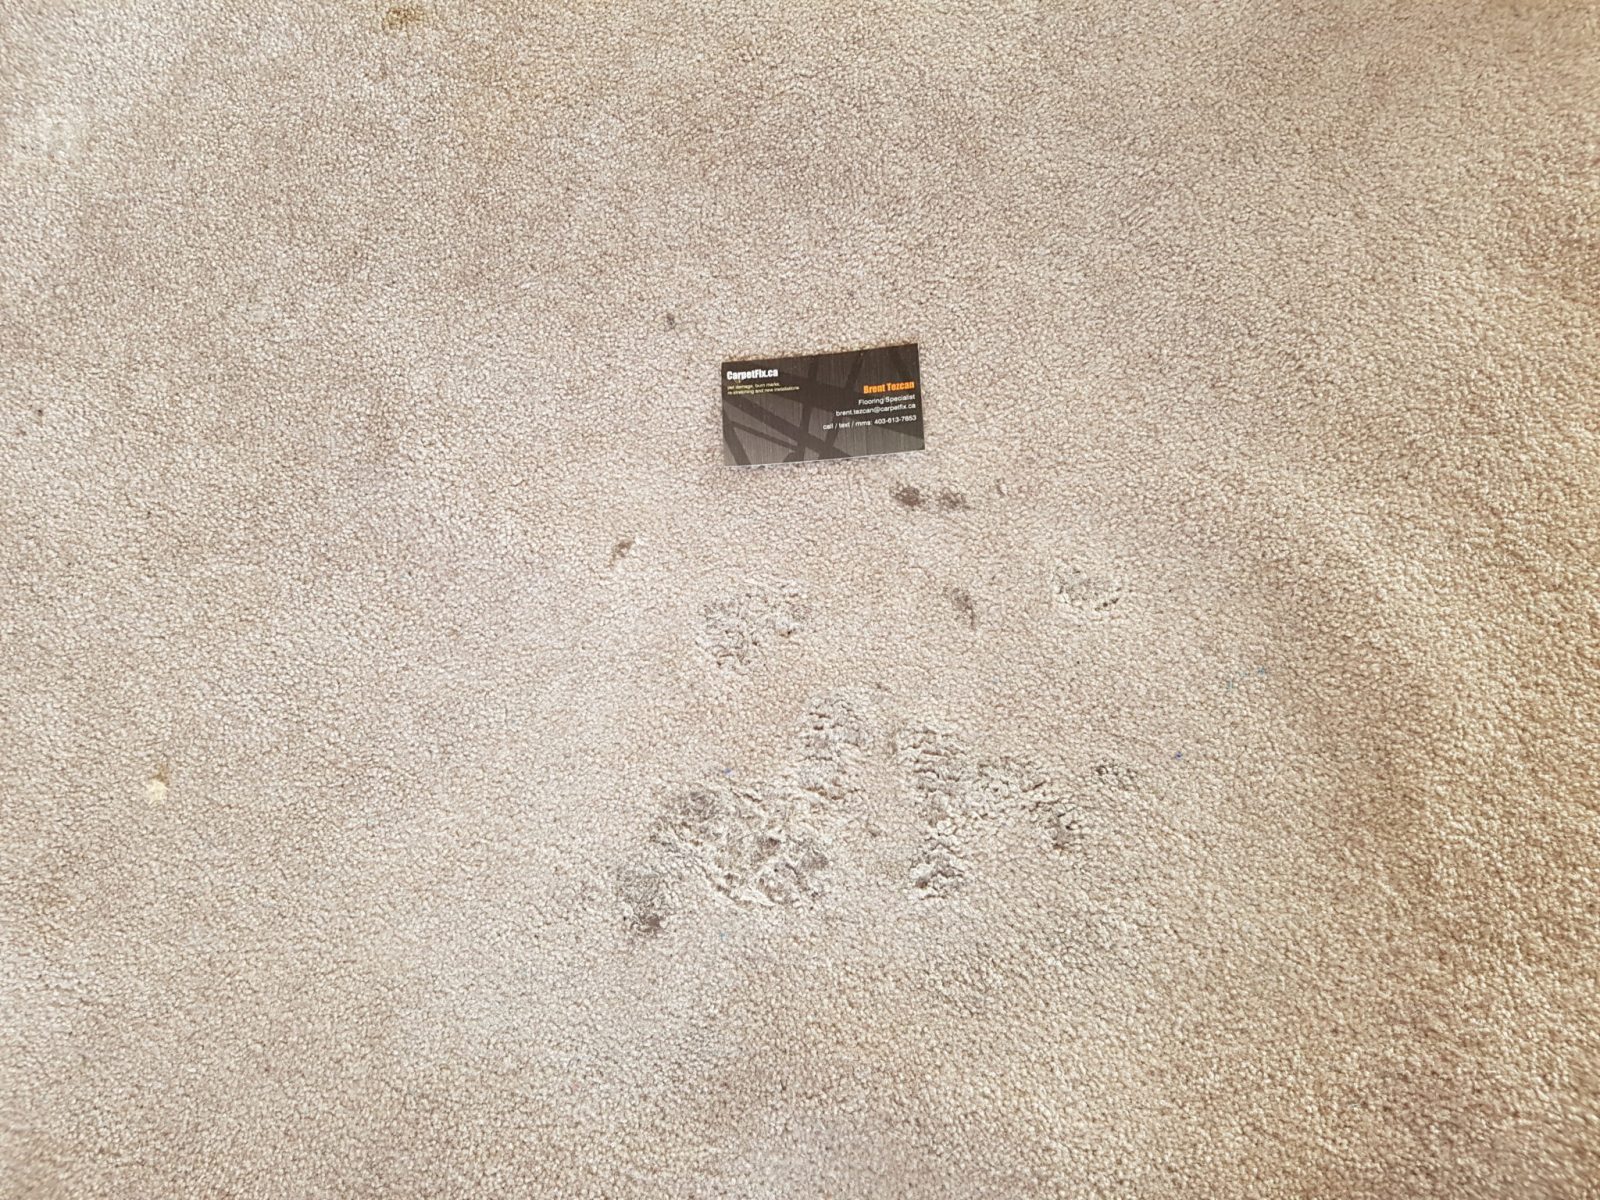 How to fix damaged carpet in the middle of the room